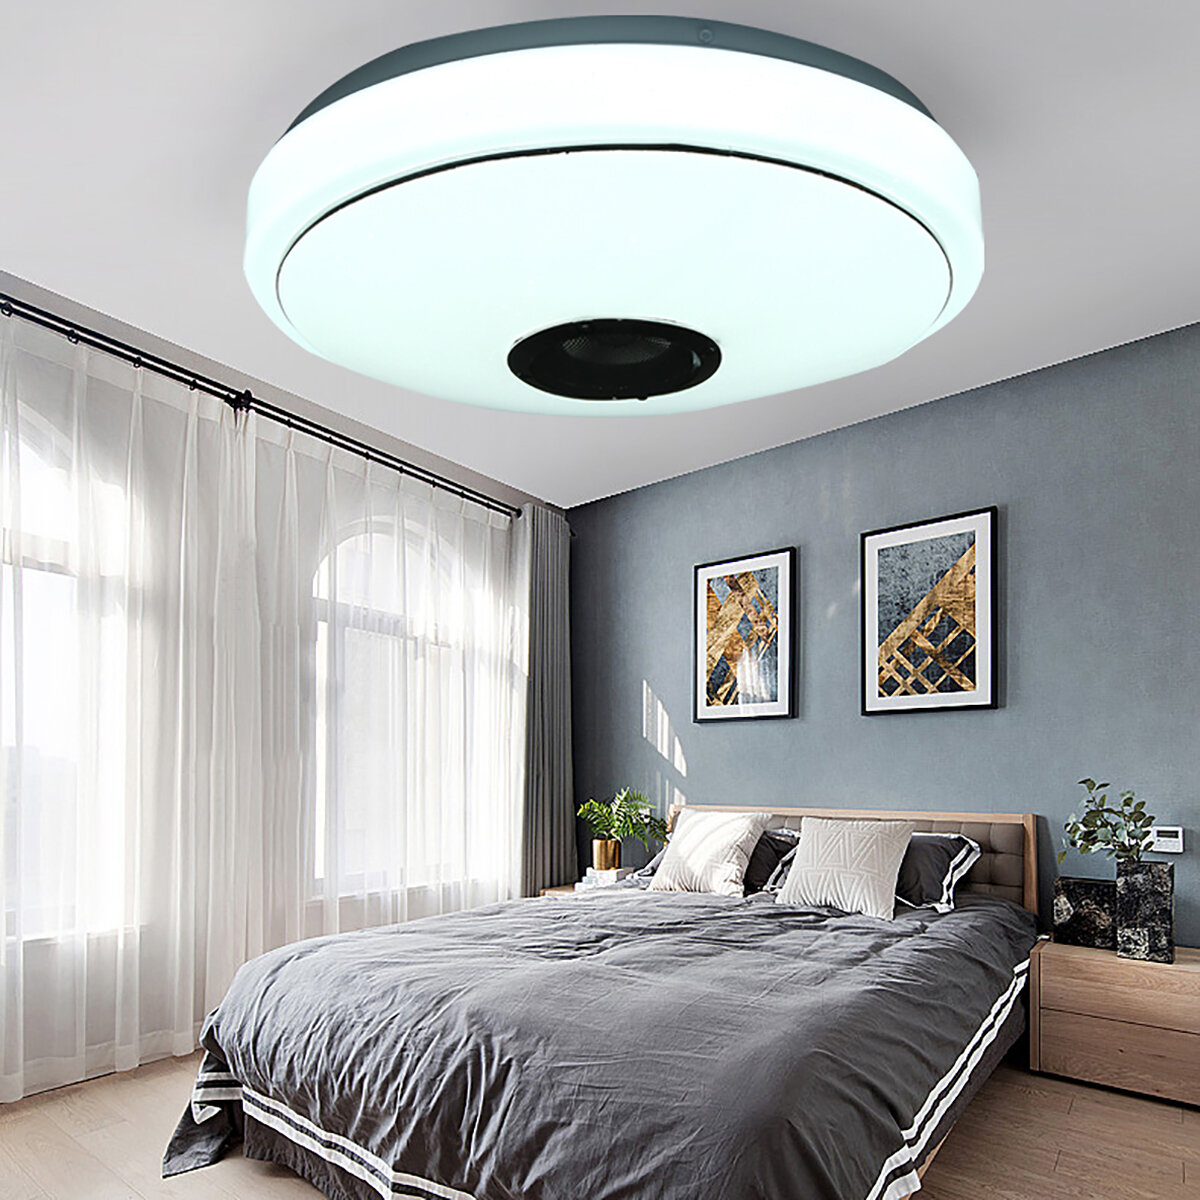 best price,33cm,36w,bluetooth,led,ceiling,light,discount